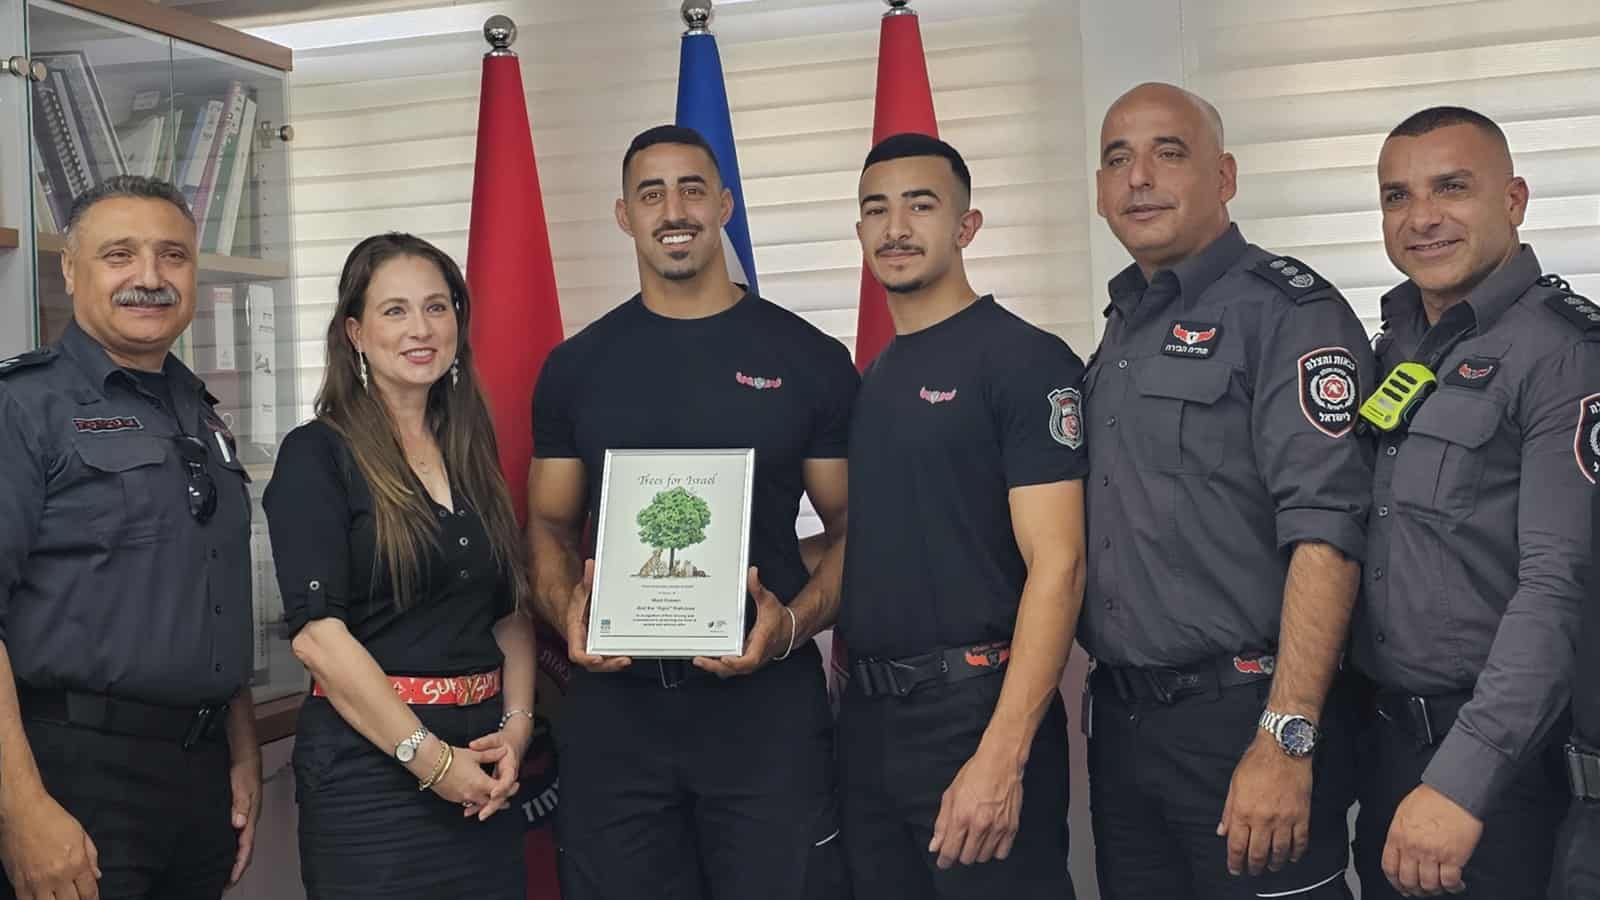 Sgt. Majd Huseen receives a certificate of appreciation for his rescue operation from the JNF-USA. Photo courtesy of the Jewish National Fund USA